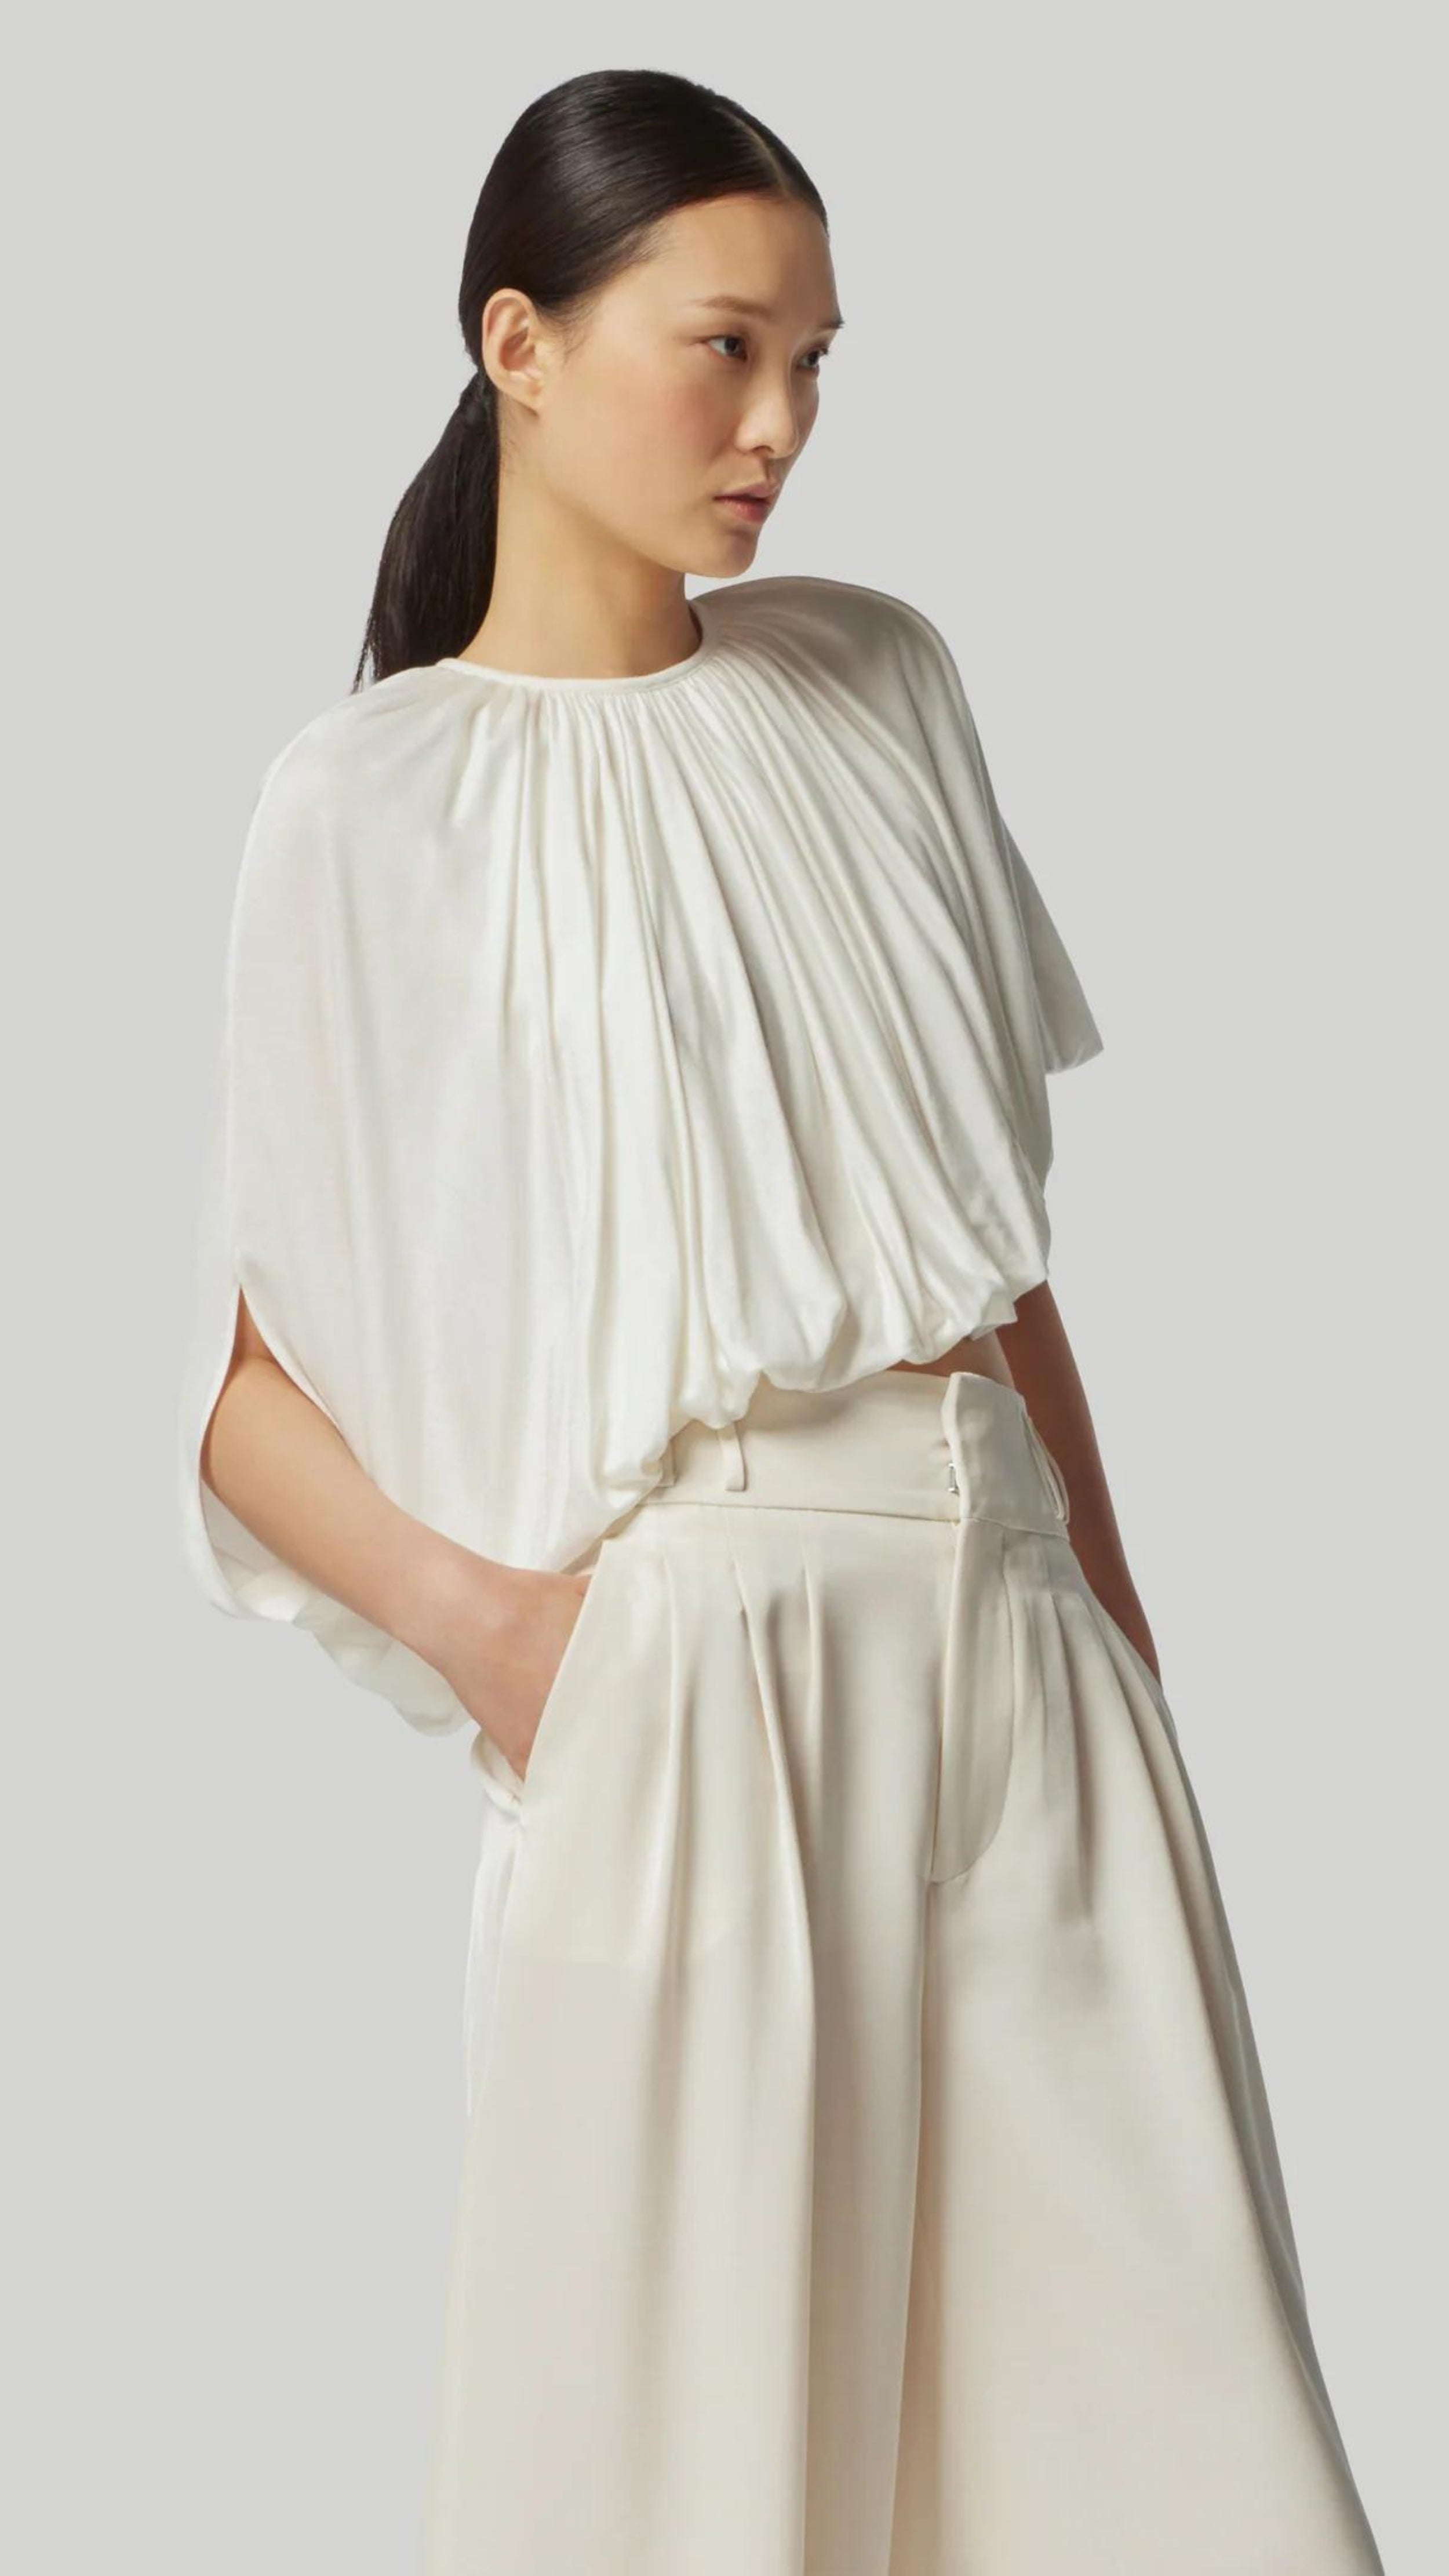 Altuzarra Naxos Top in Ivory. Draped jersey create a fluid look with an asymmetrical hemline. Shown on model facing to the front side.